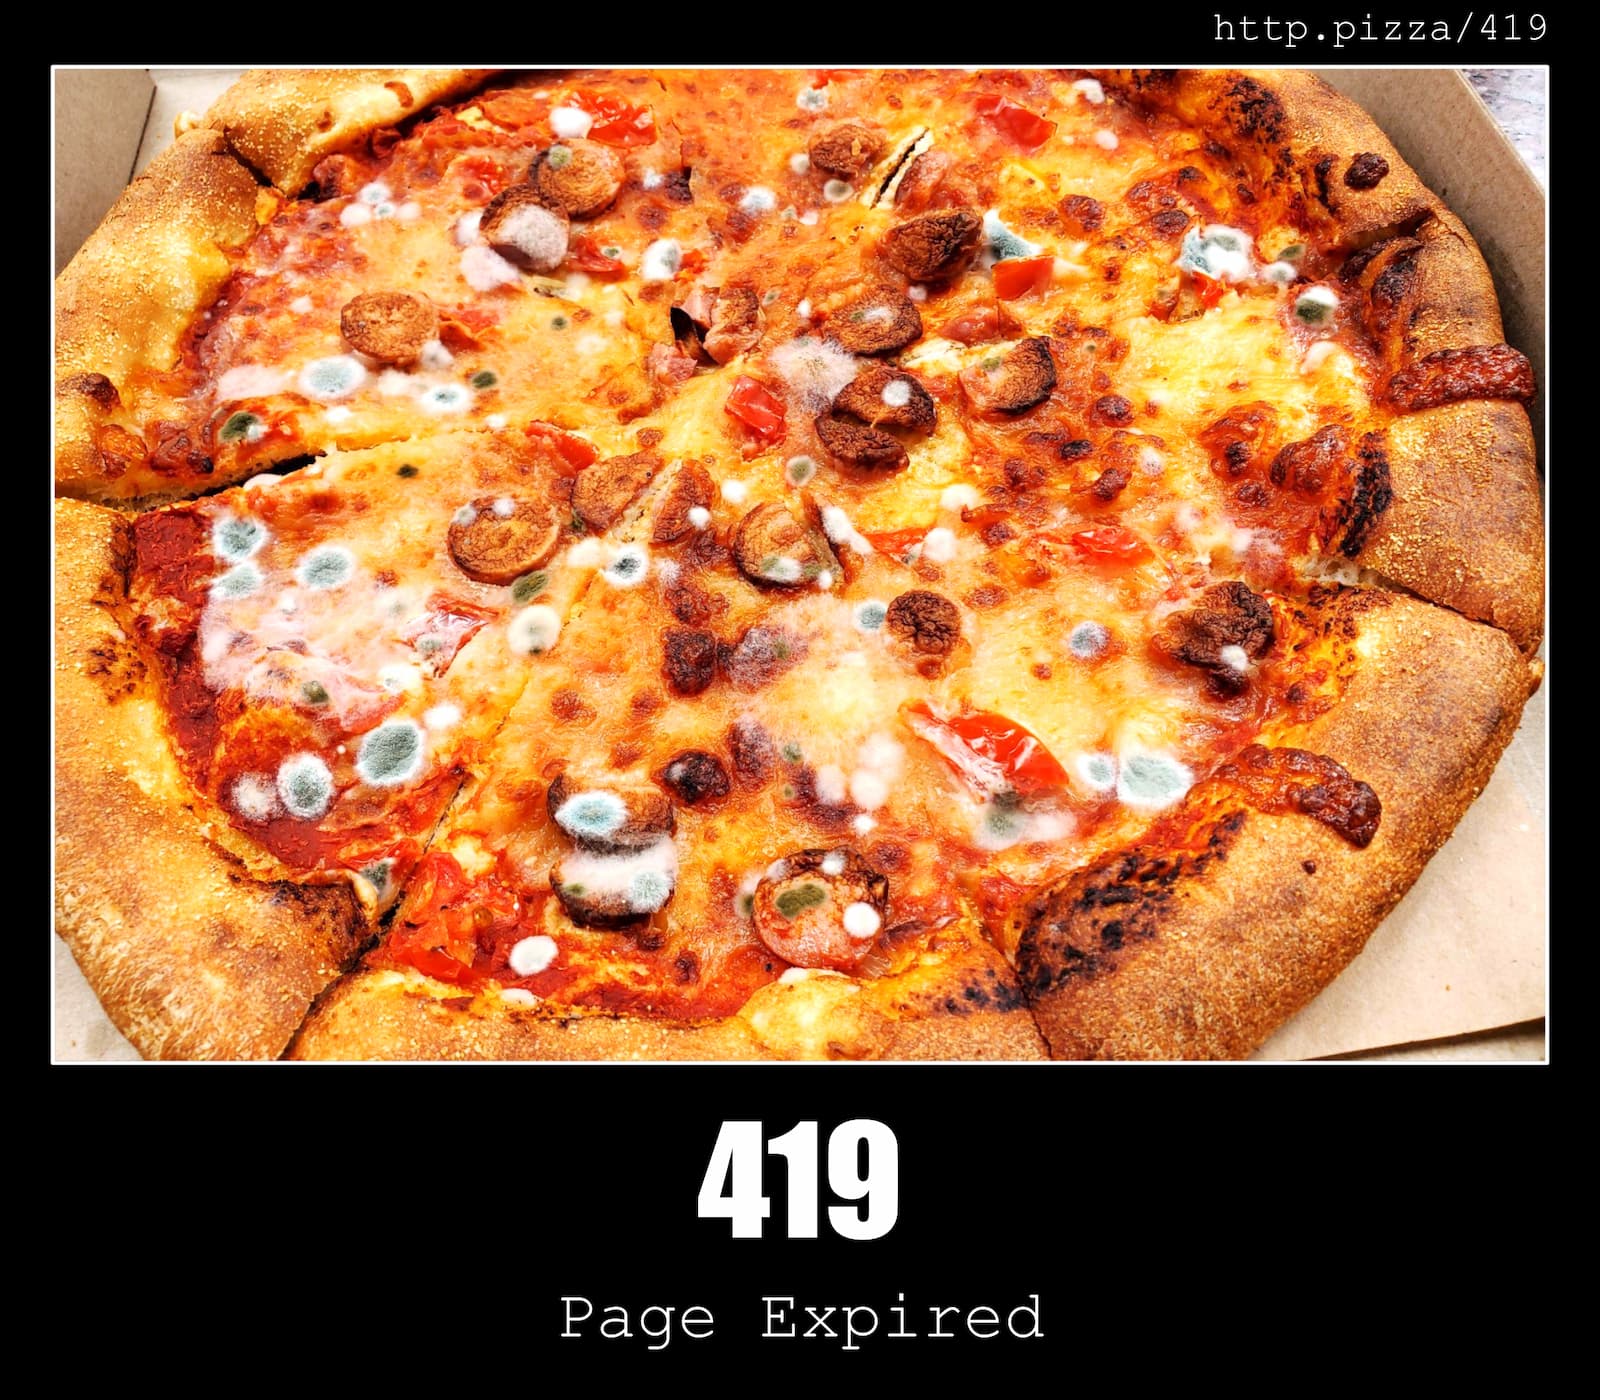 HTTP Status Code 419 Page Expired & Pizzas